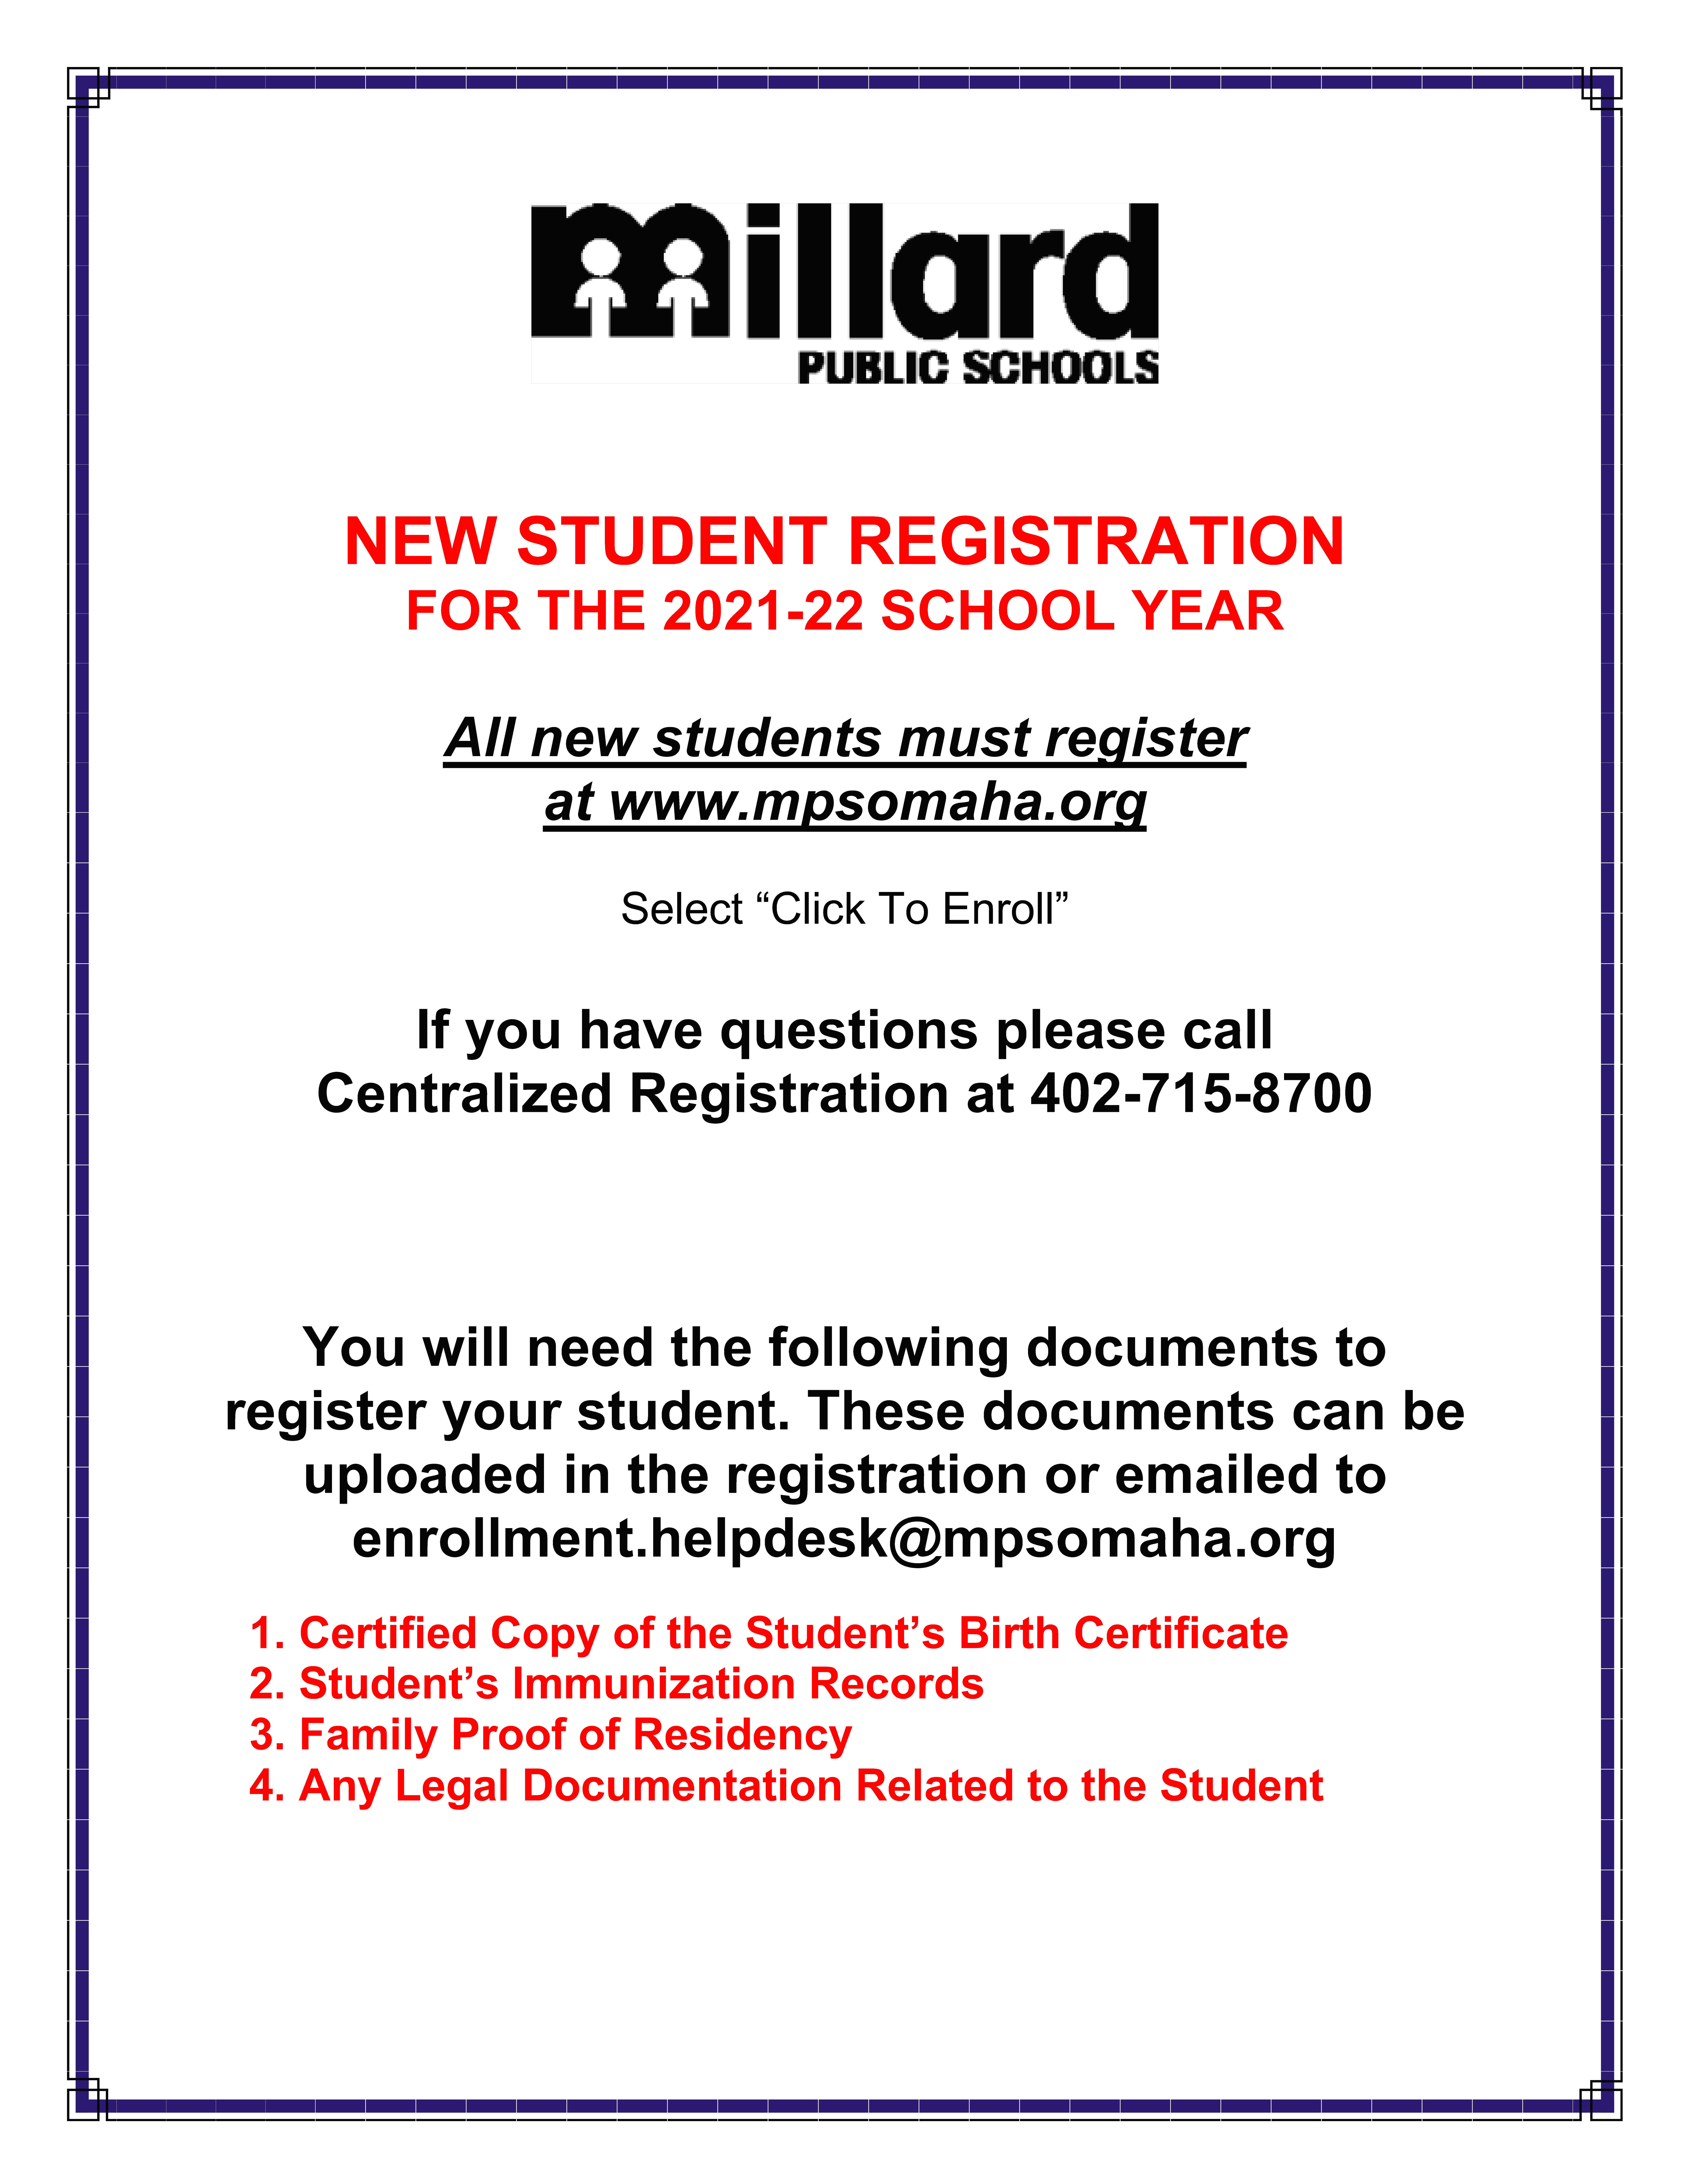 How to enroll student